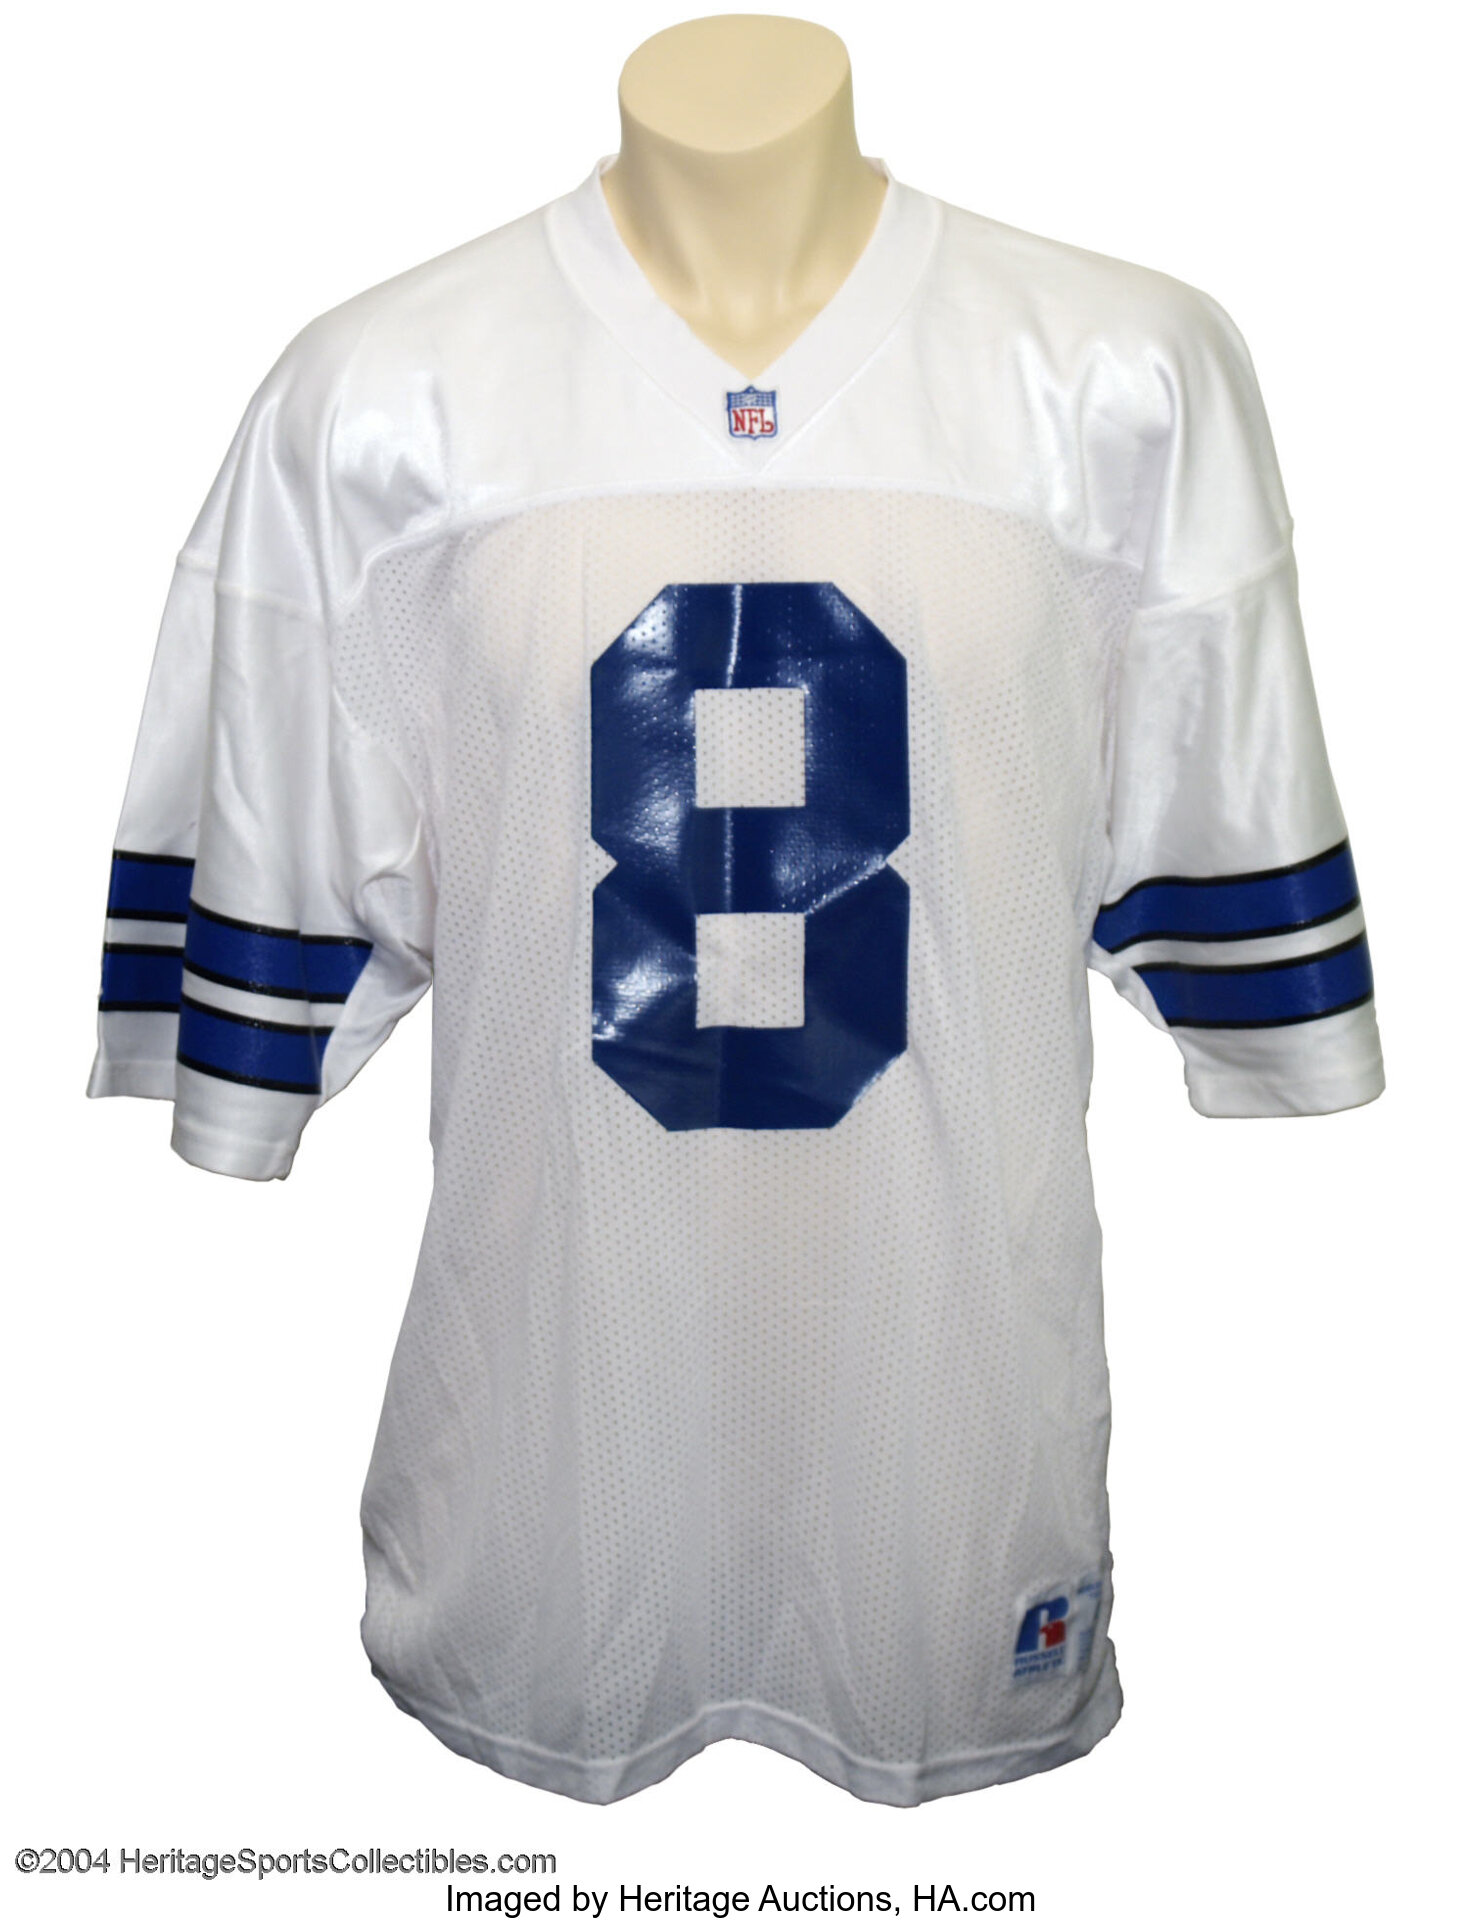 TROY AIKMAN DALLAS COWBOYS PRACTICE USED JERSEY. Direct